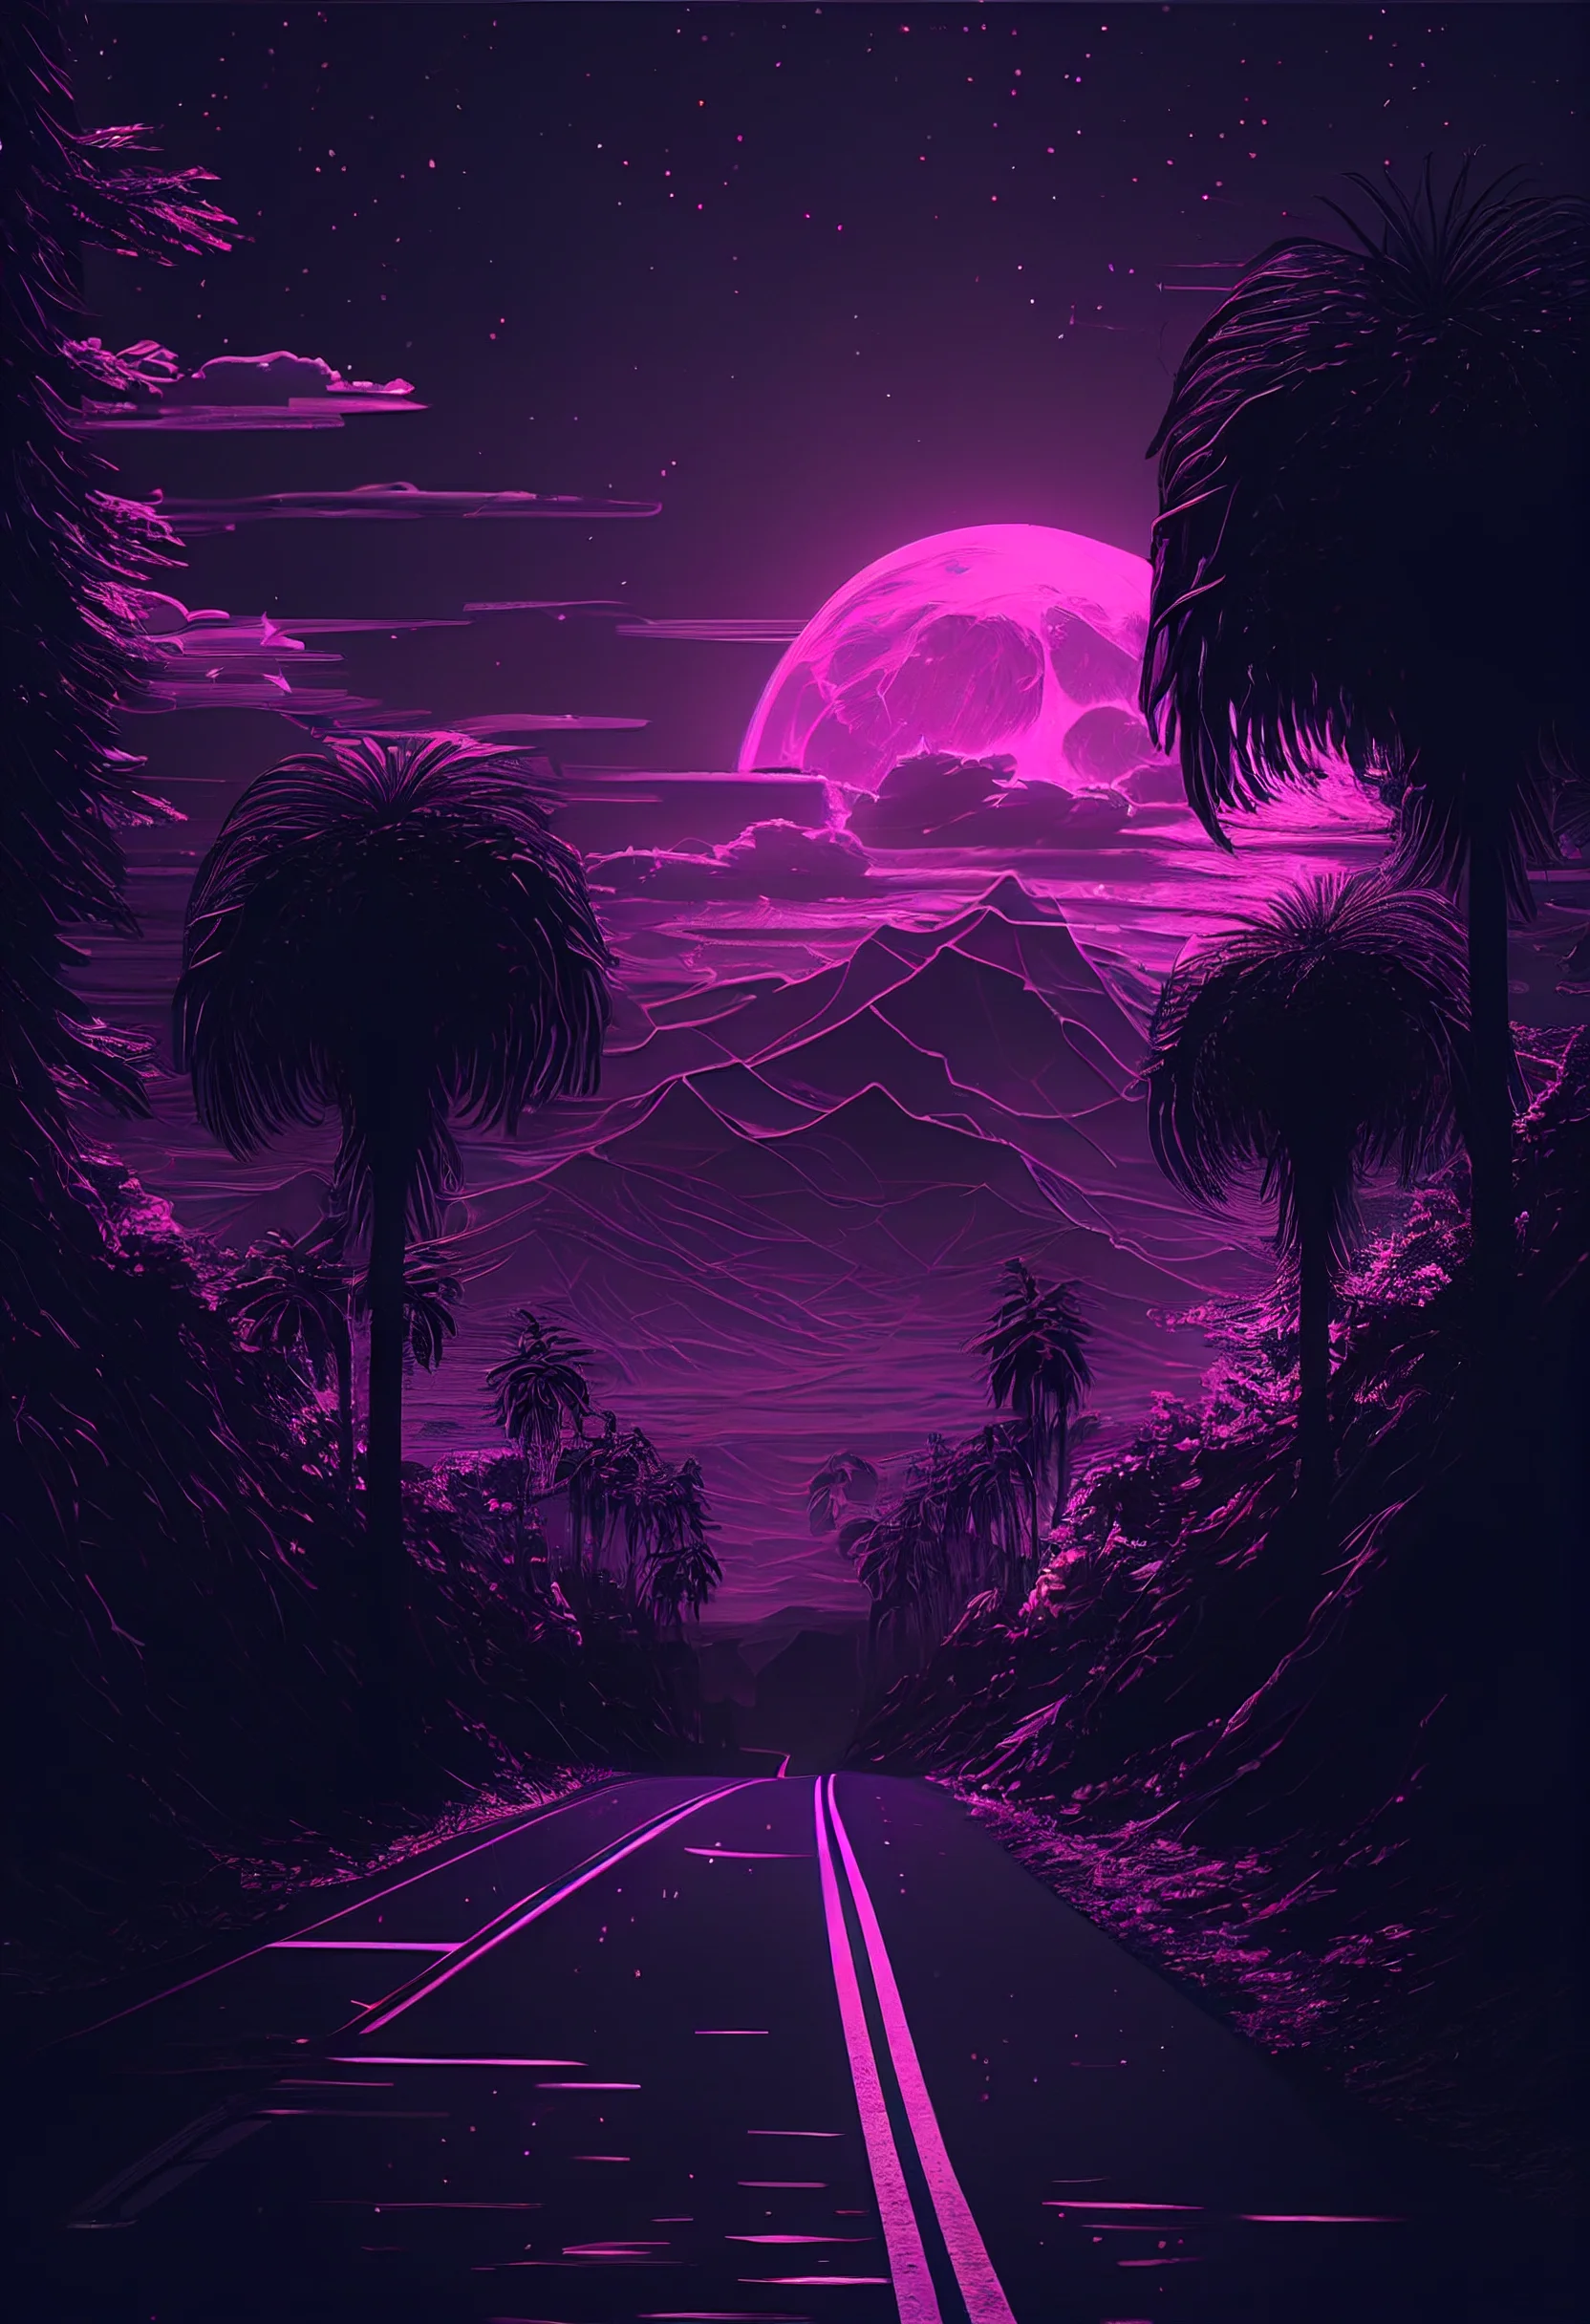 A purple road with palm trees and the moon - Purple